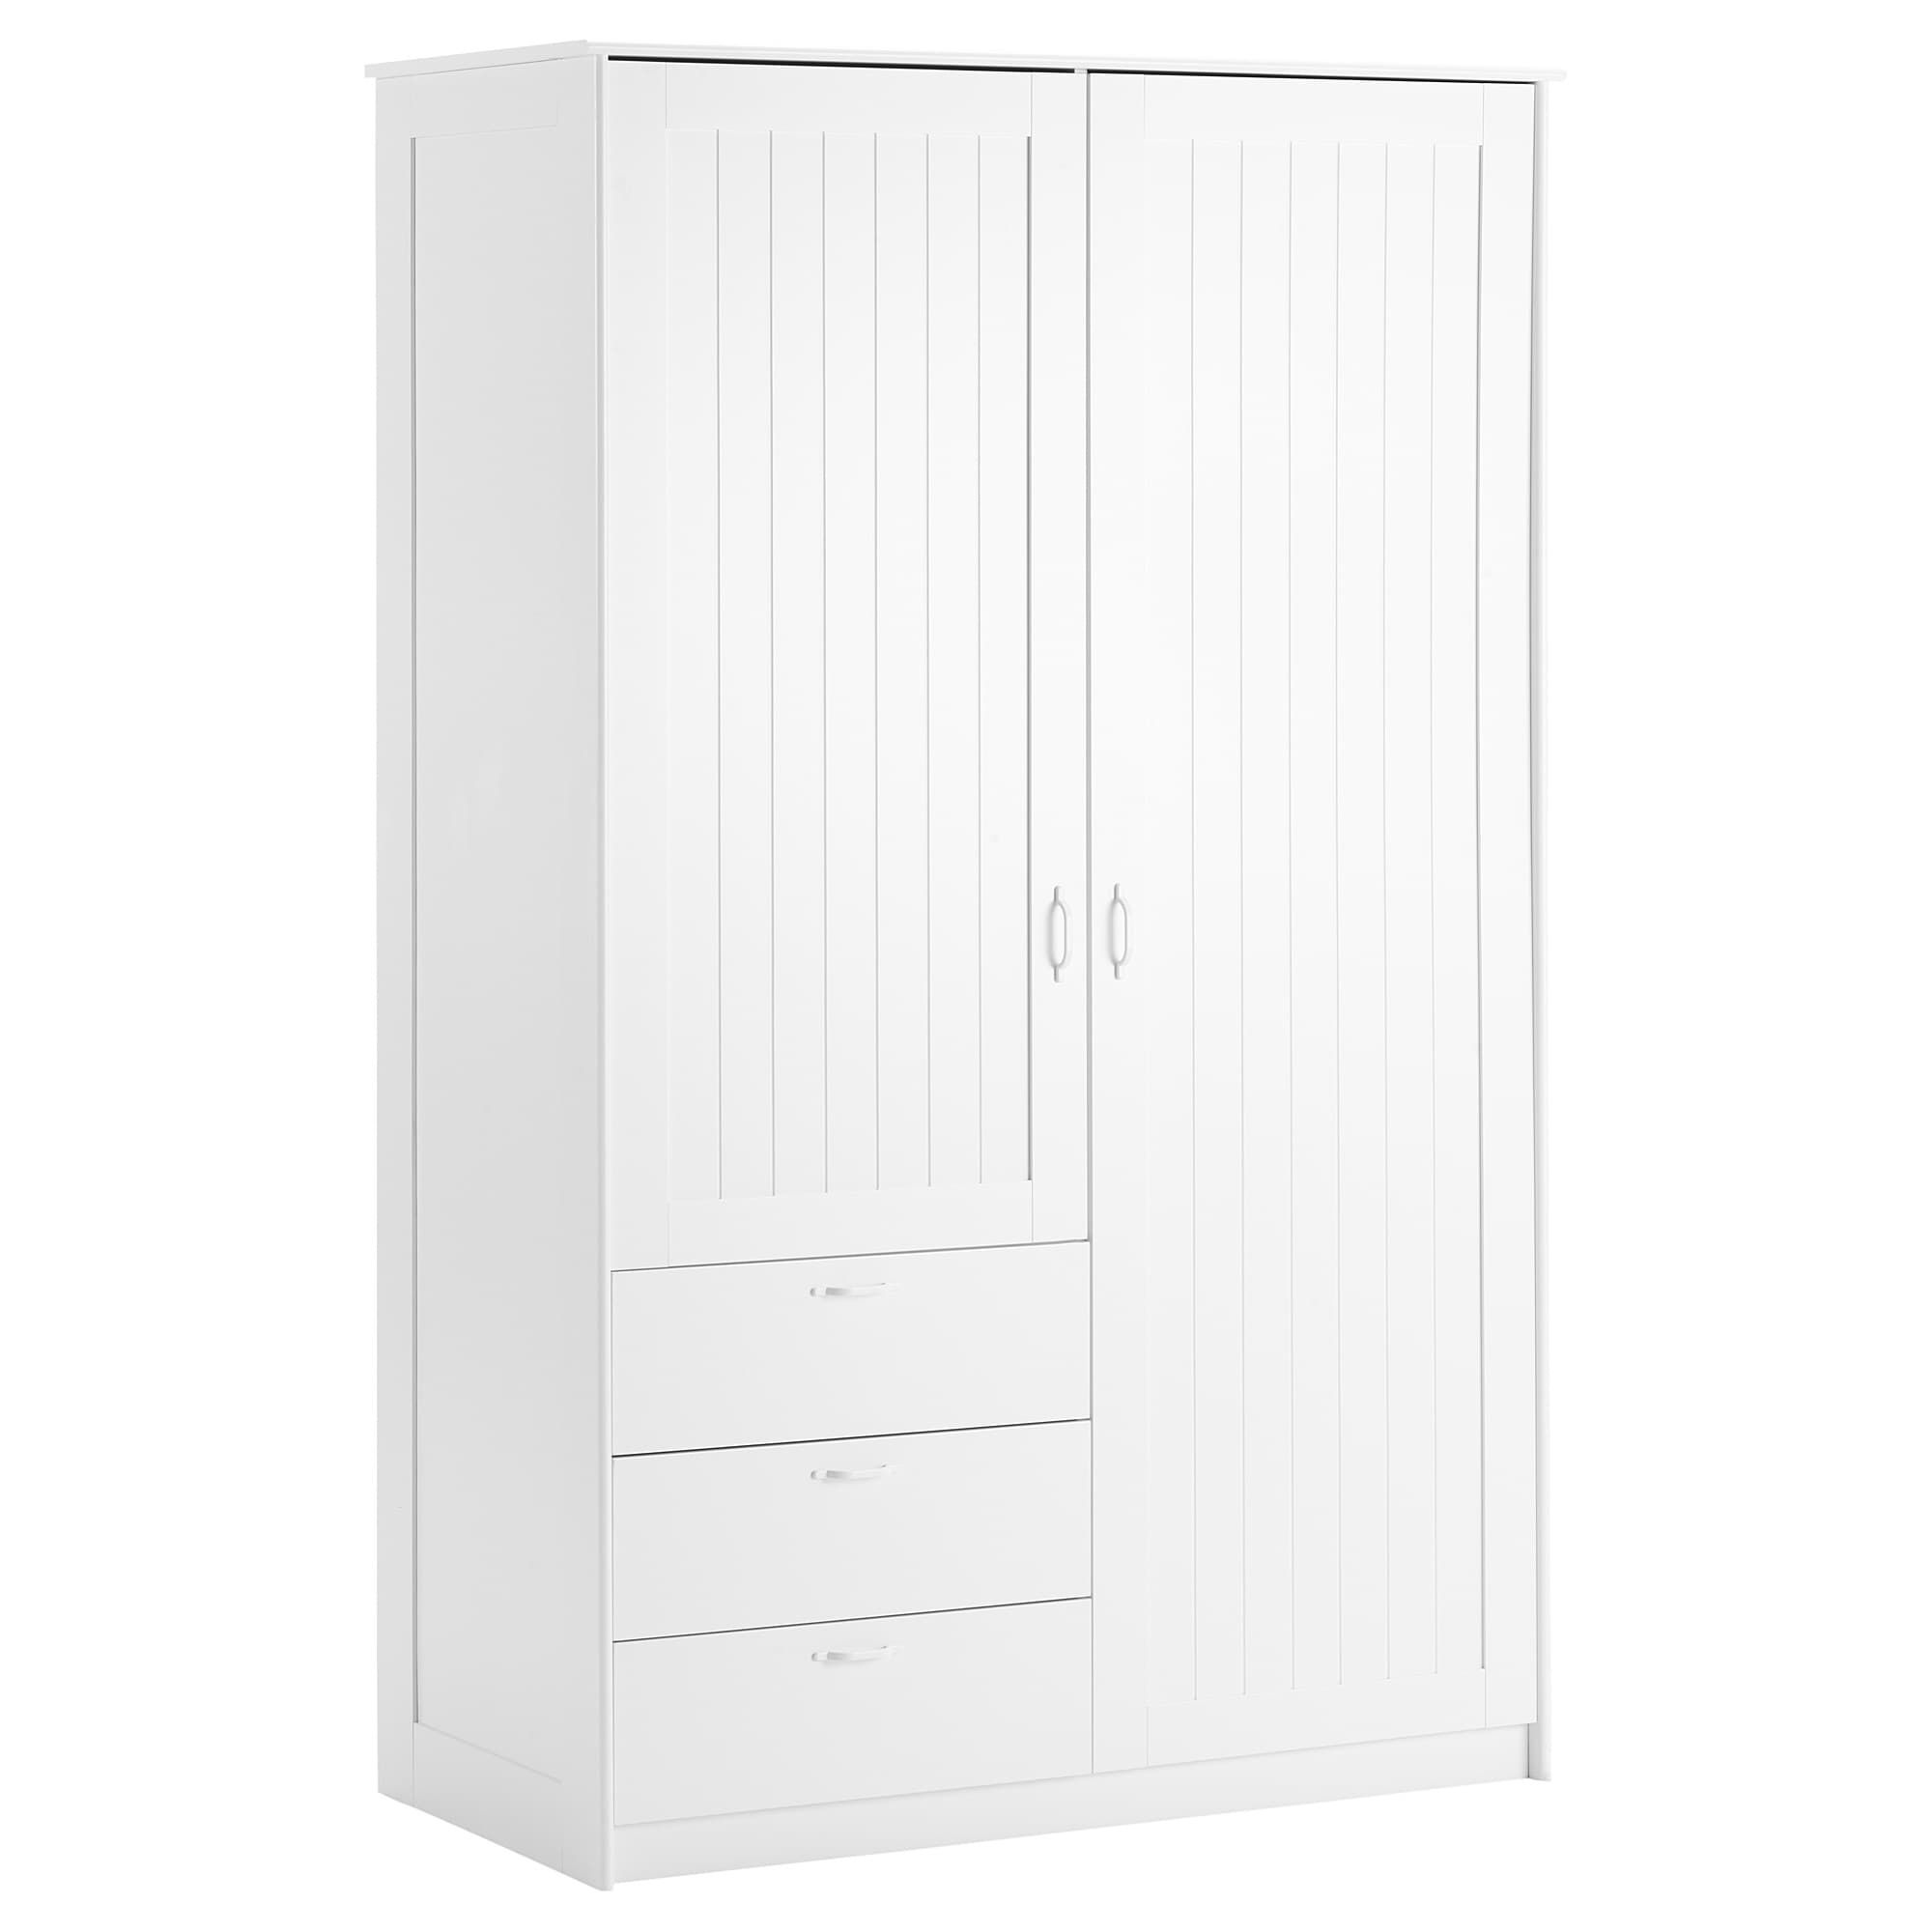 Fitted Wardrobe Depth Intended For Widely Used Wardrobes – Sliding & Fitted Wardrobes – Ikea (View 14 of 15)